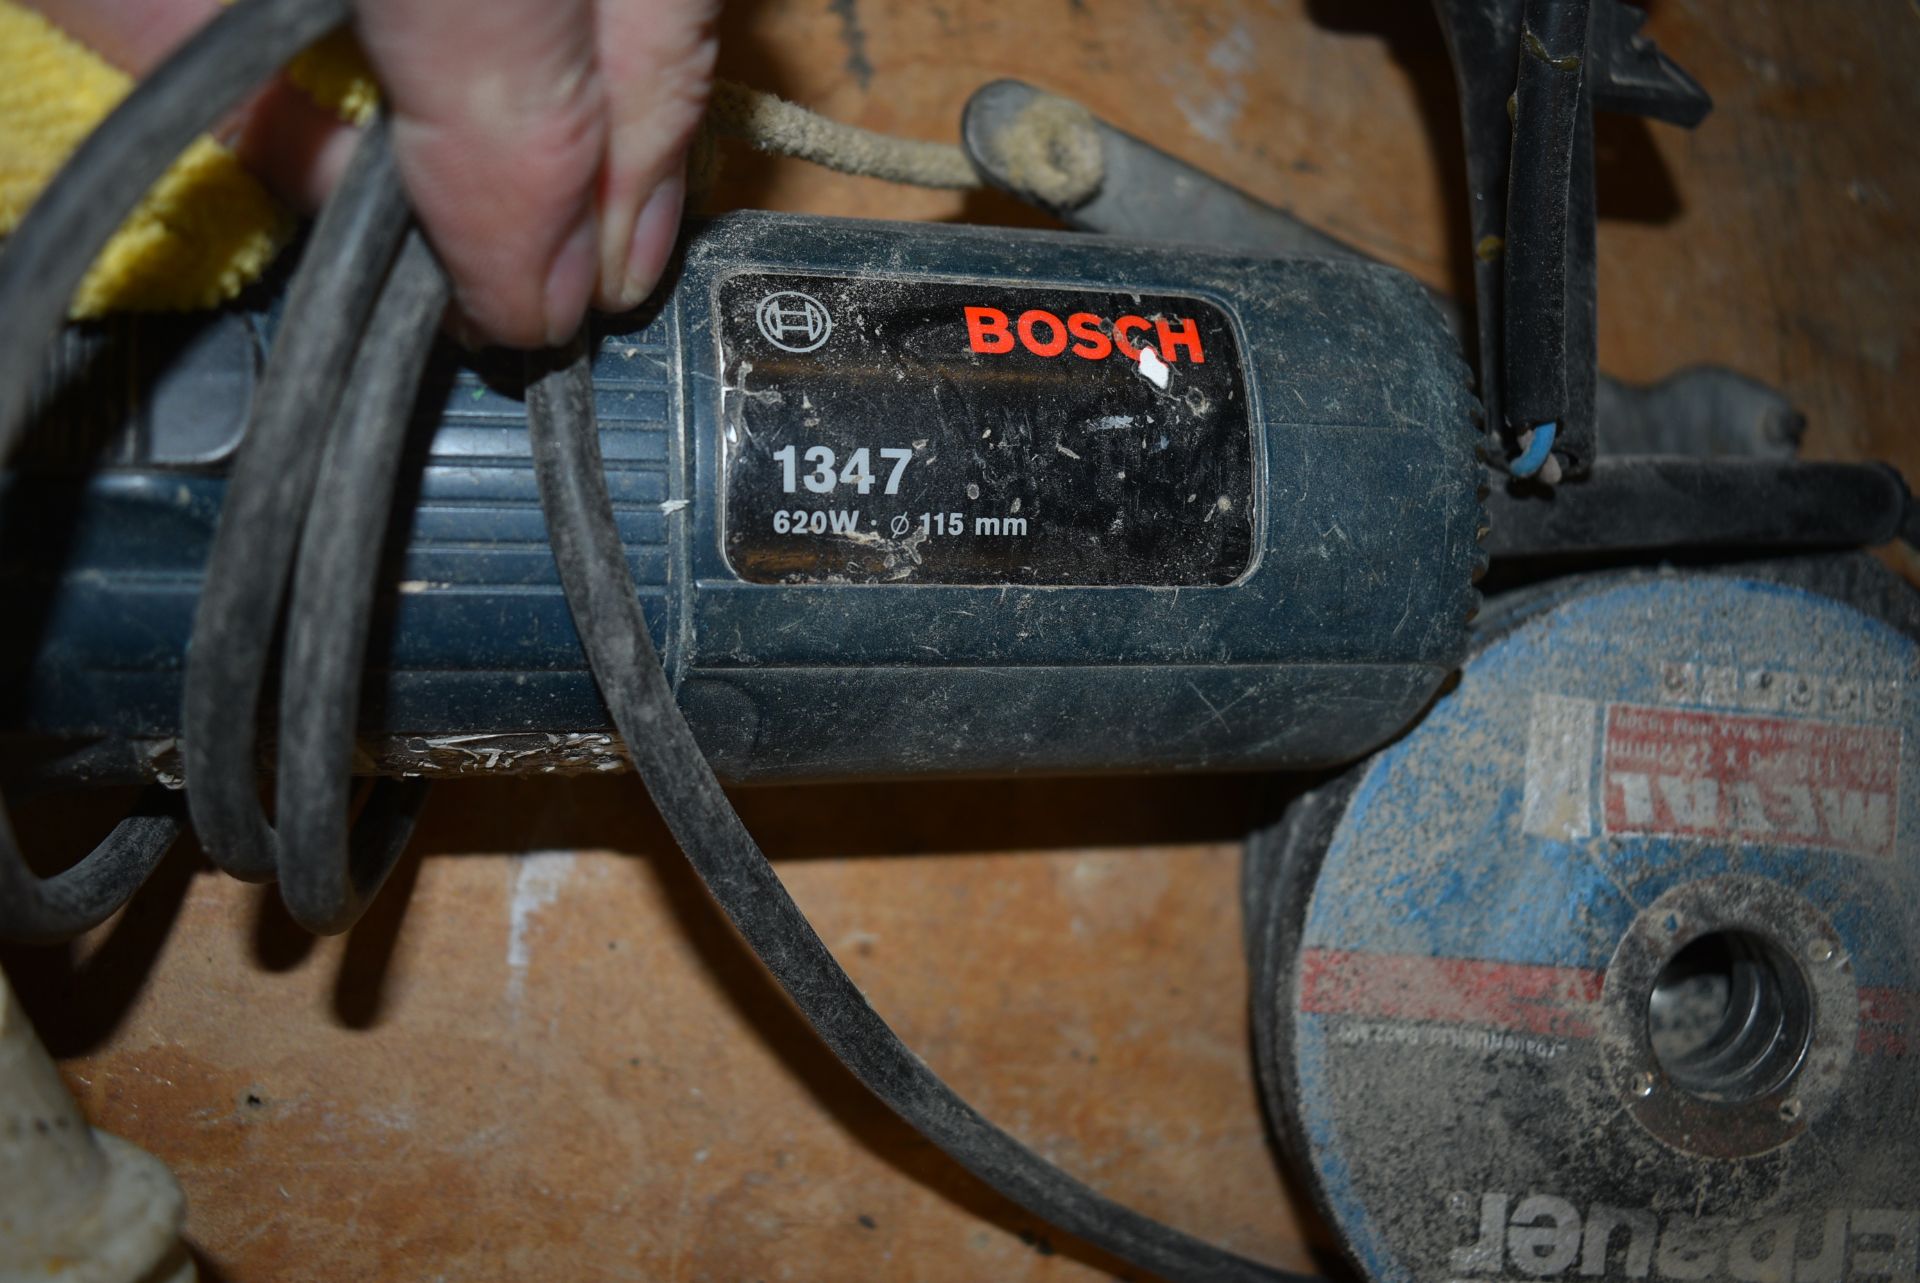 *Bosch 1347 110v 4.5” Grinder with Cutting Discs - Image 2 of 2